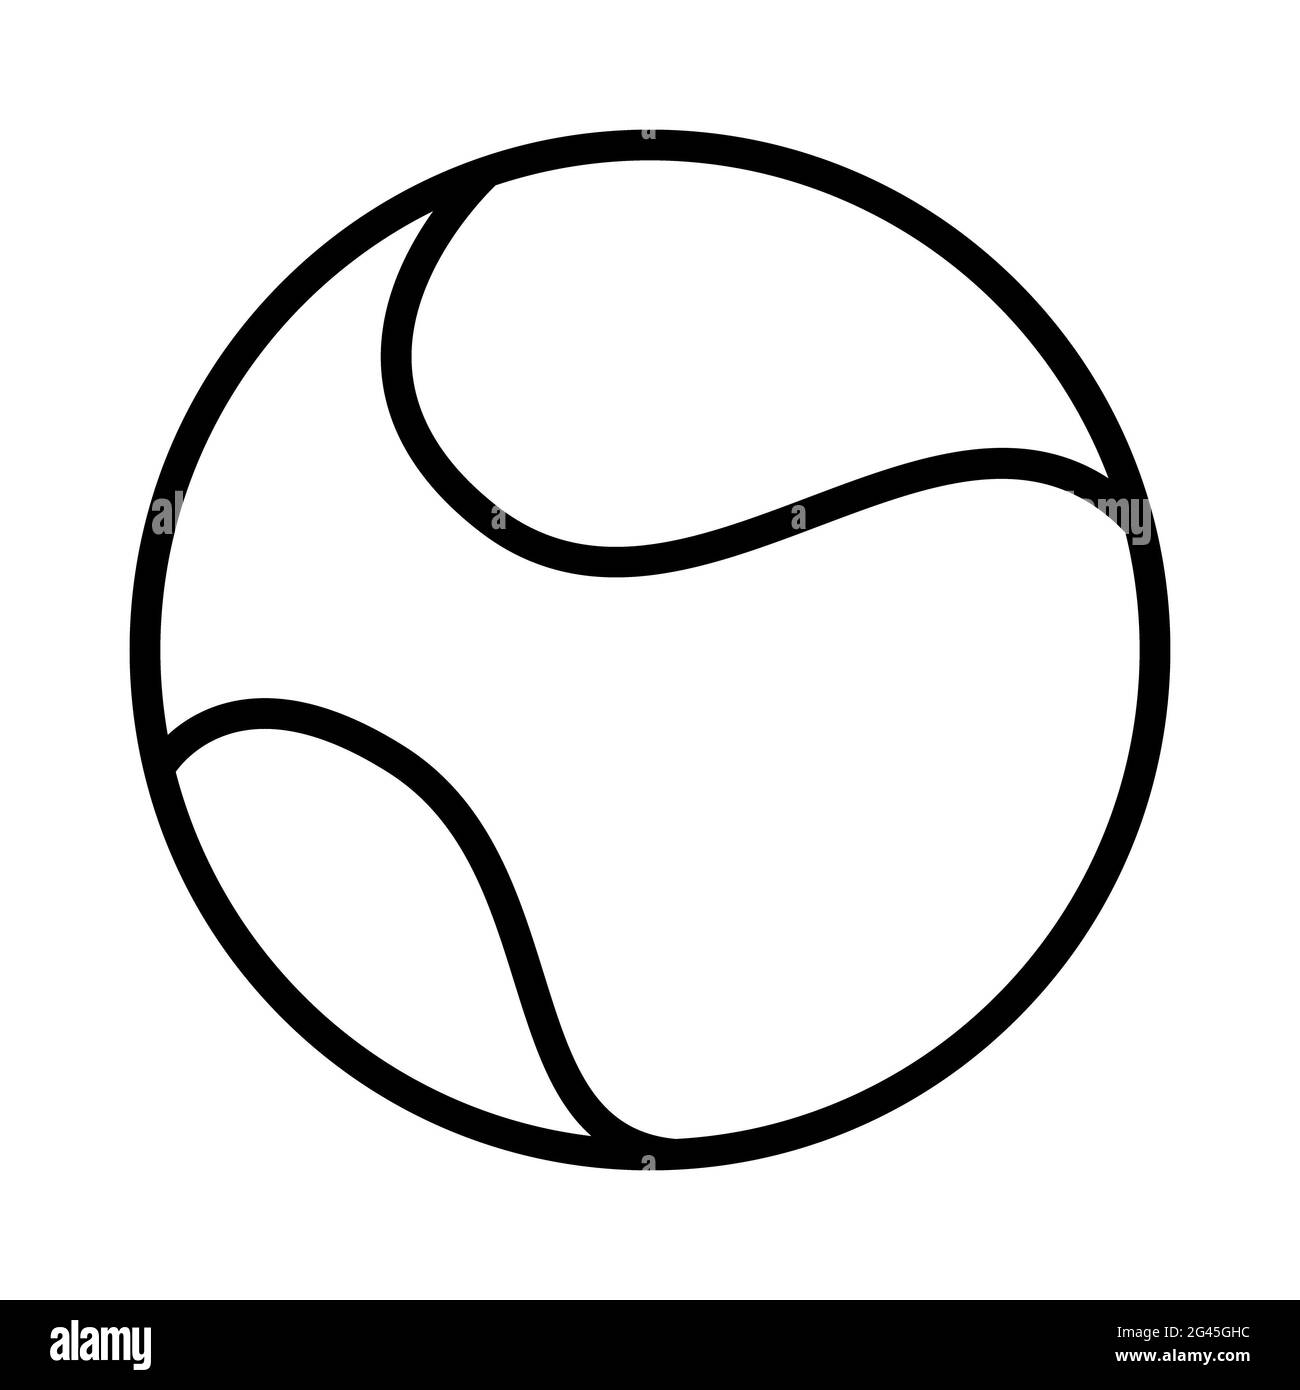 Tennis ball icon. Flat pictogram vector stock illustration. Isolated sign  eps10 Stock Photo - Alamy